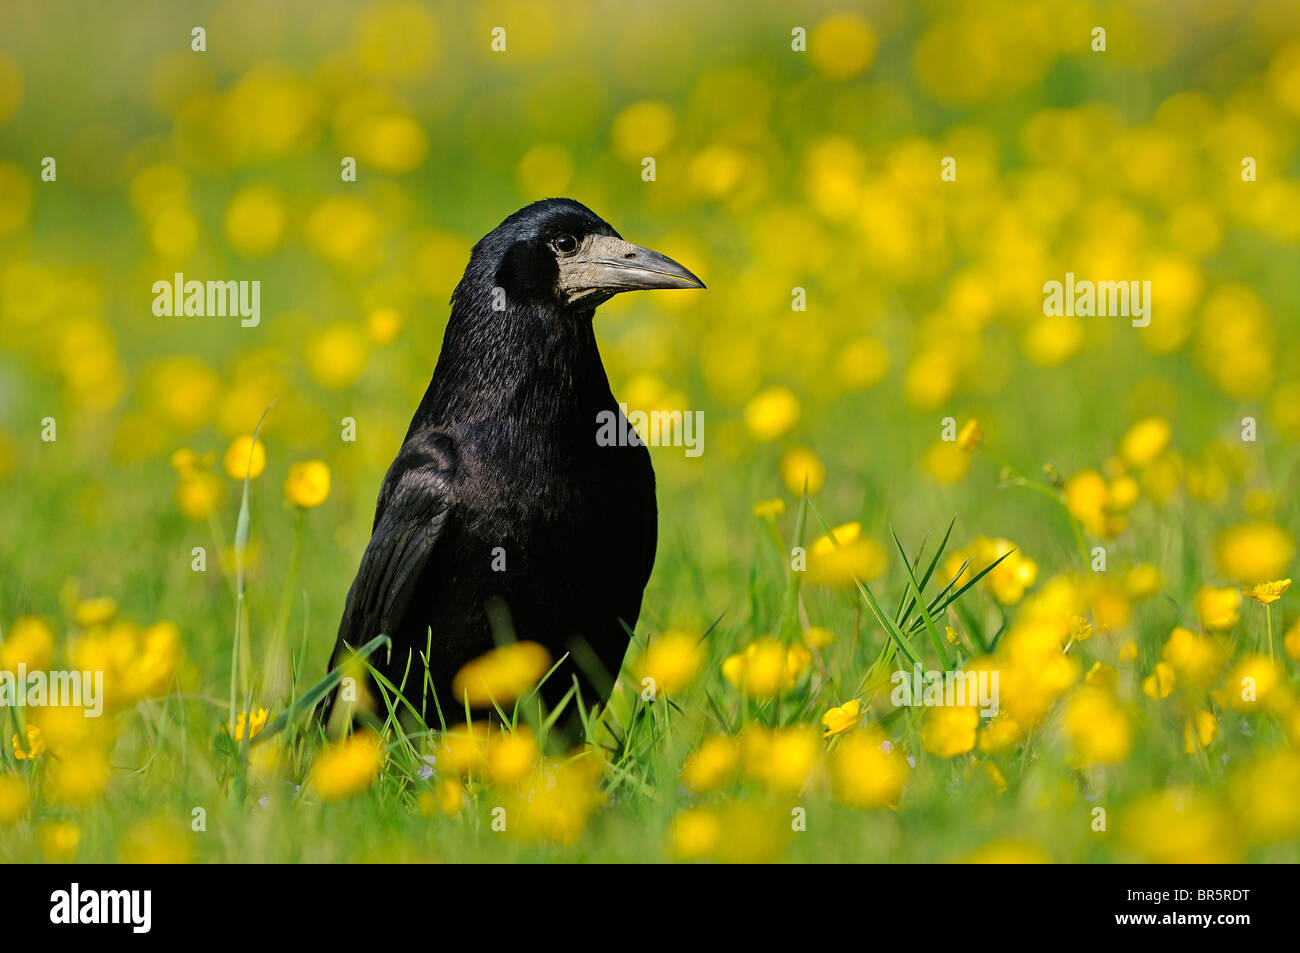 Rook (Corvus frugilegus) standing on the ground amongst buttercups, Oxfordshire, UK. Stock Photo